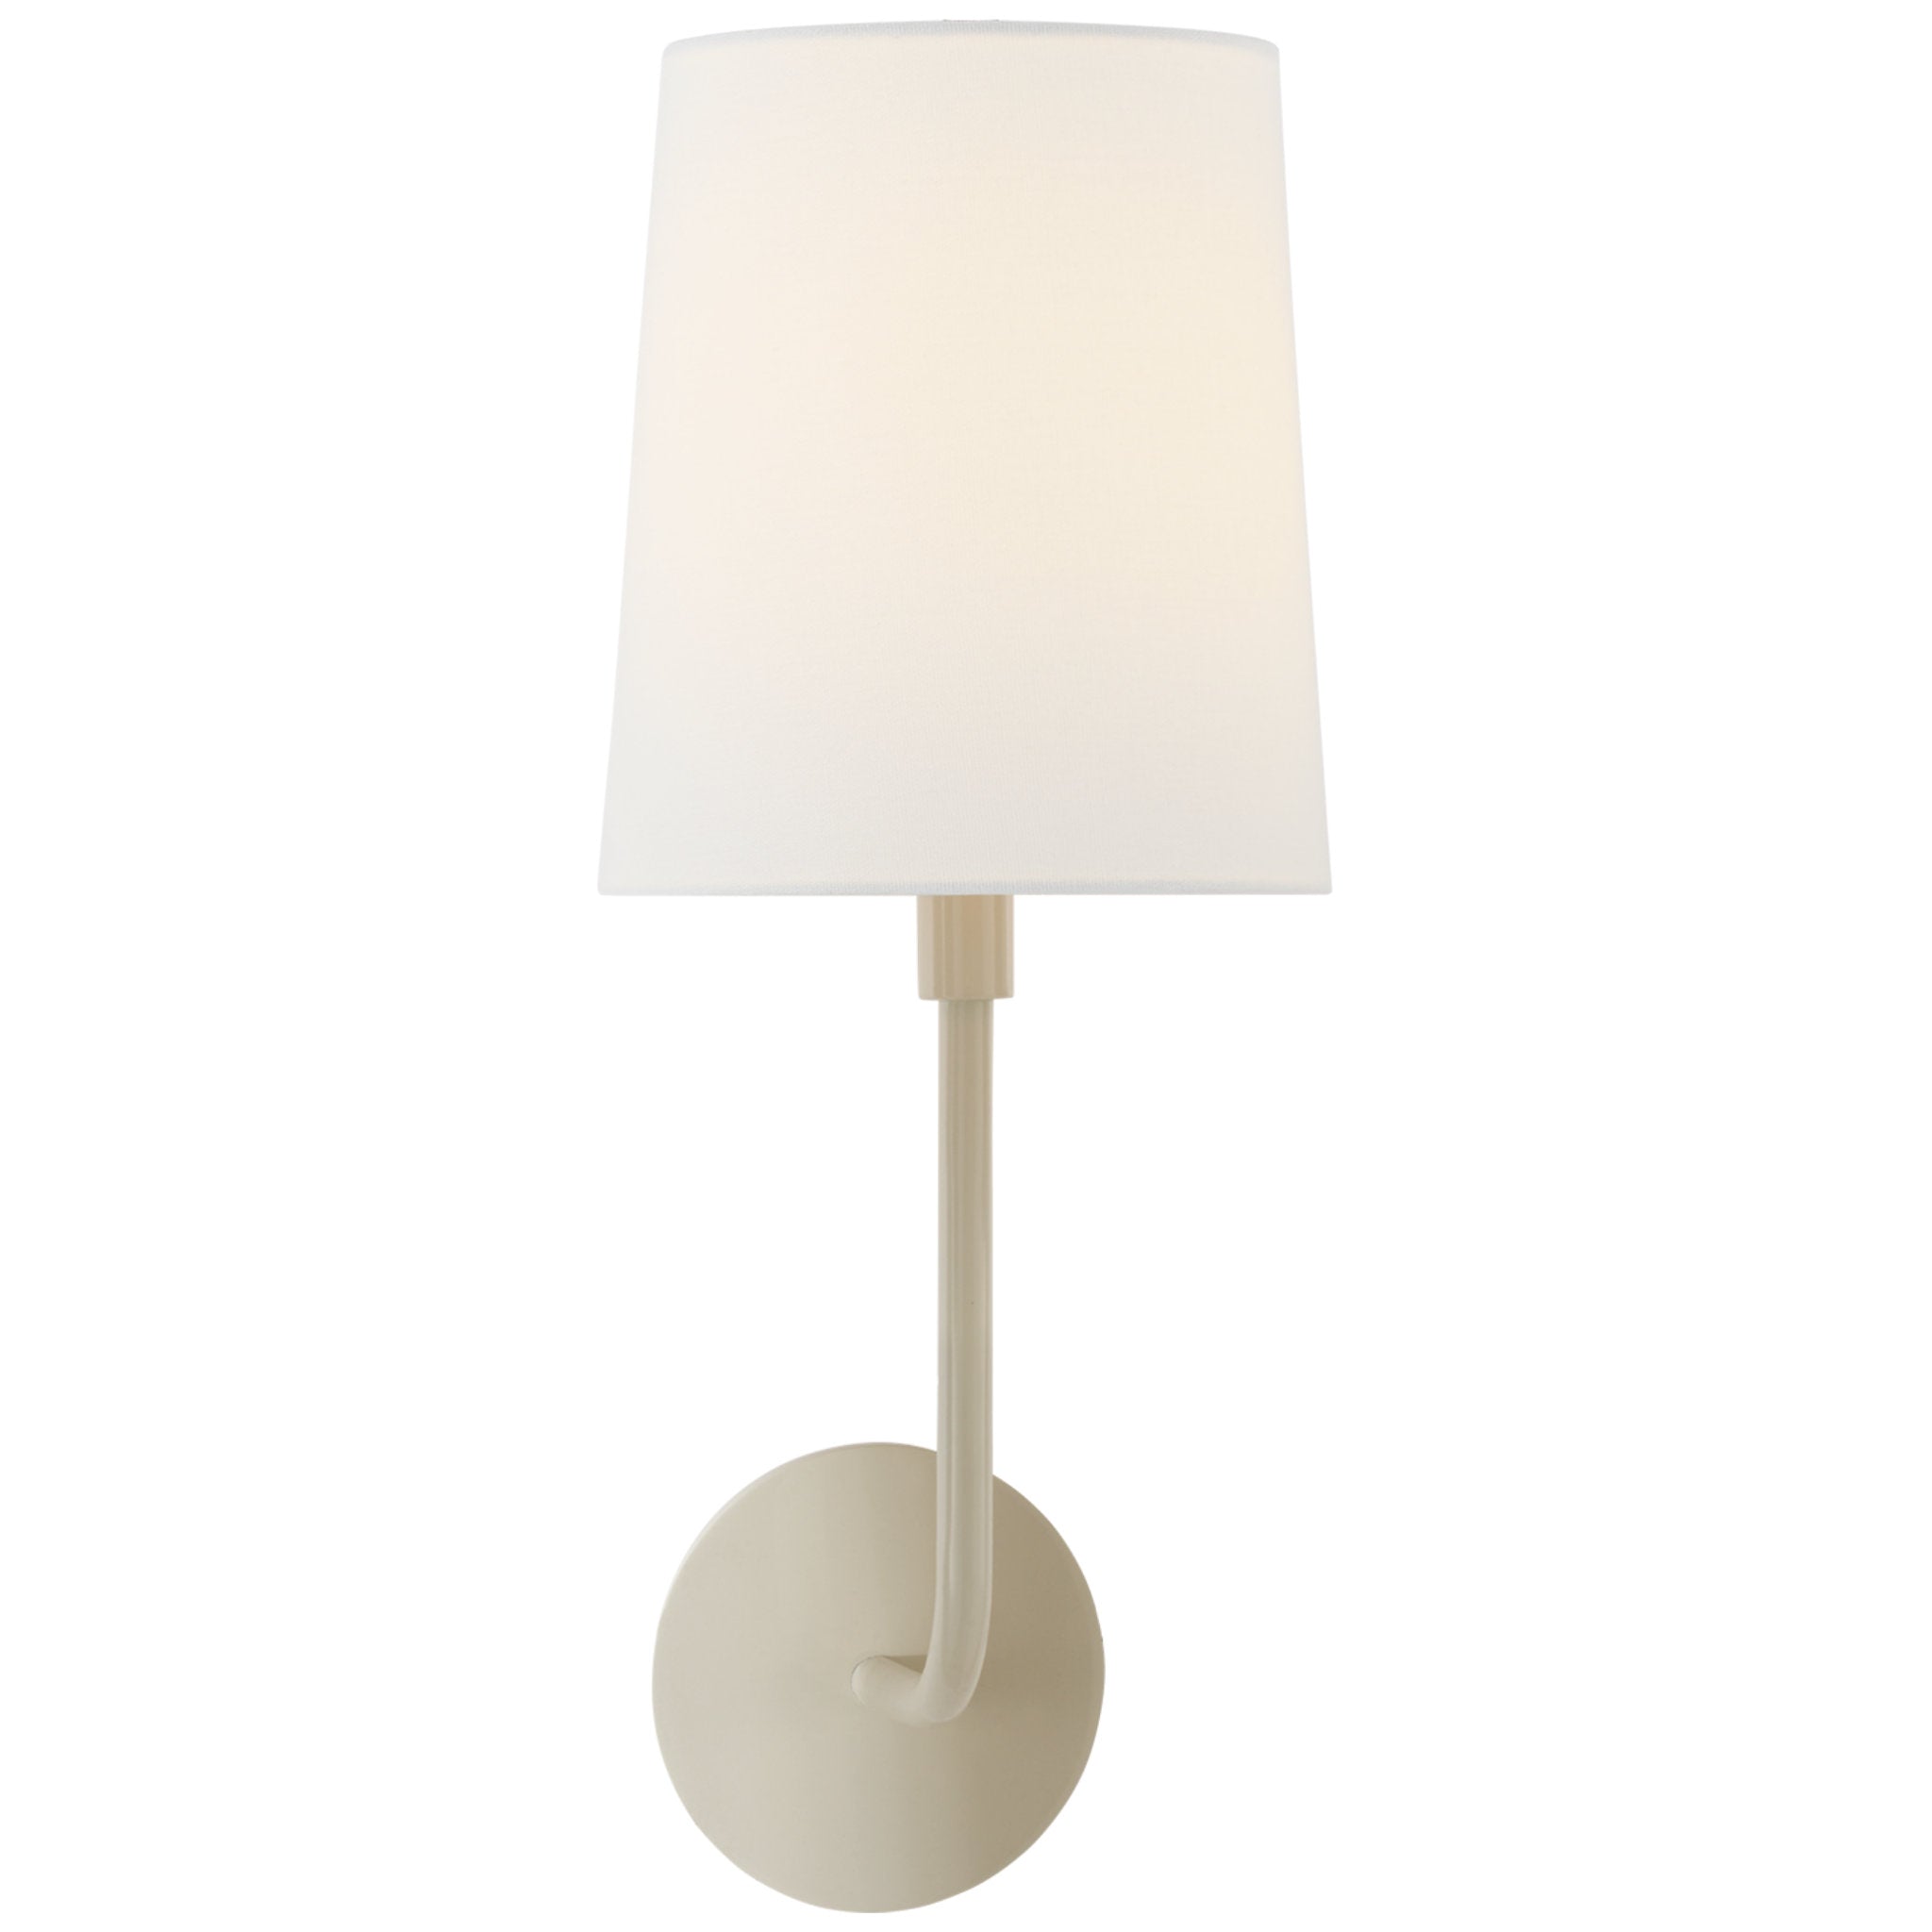 Barbara Barry Go Lightly Sconce in China White with Linen Shade